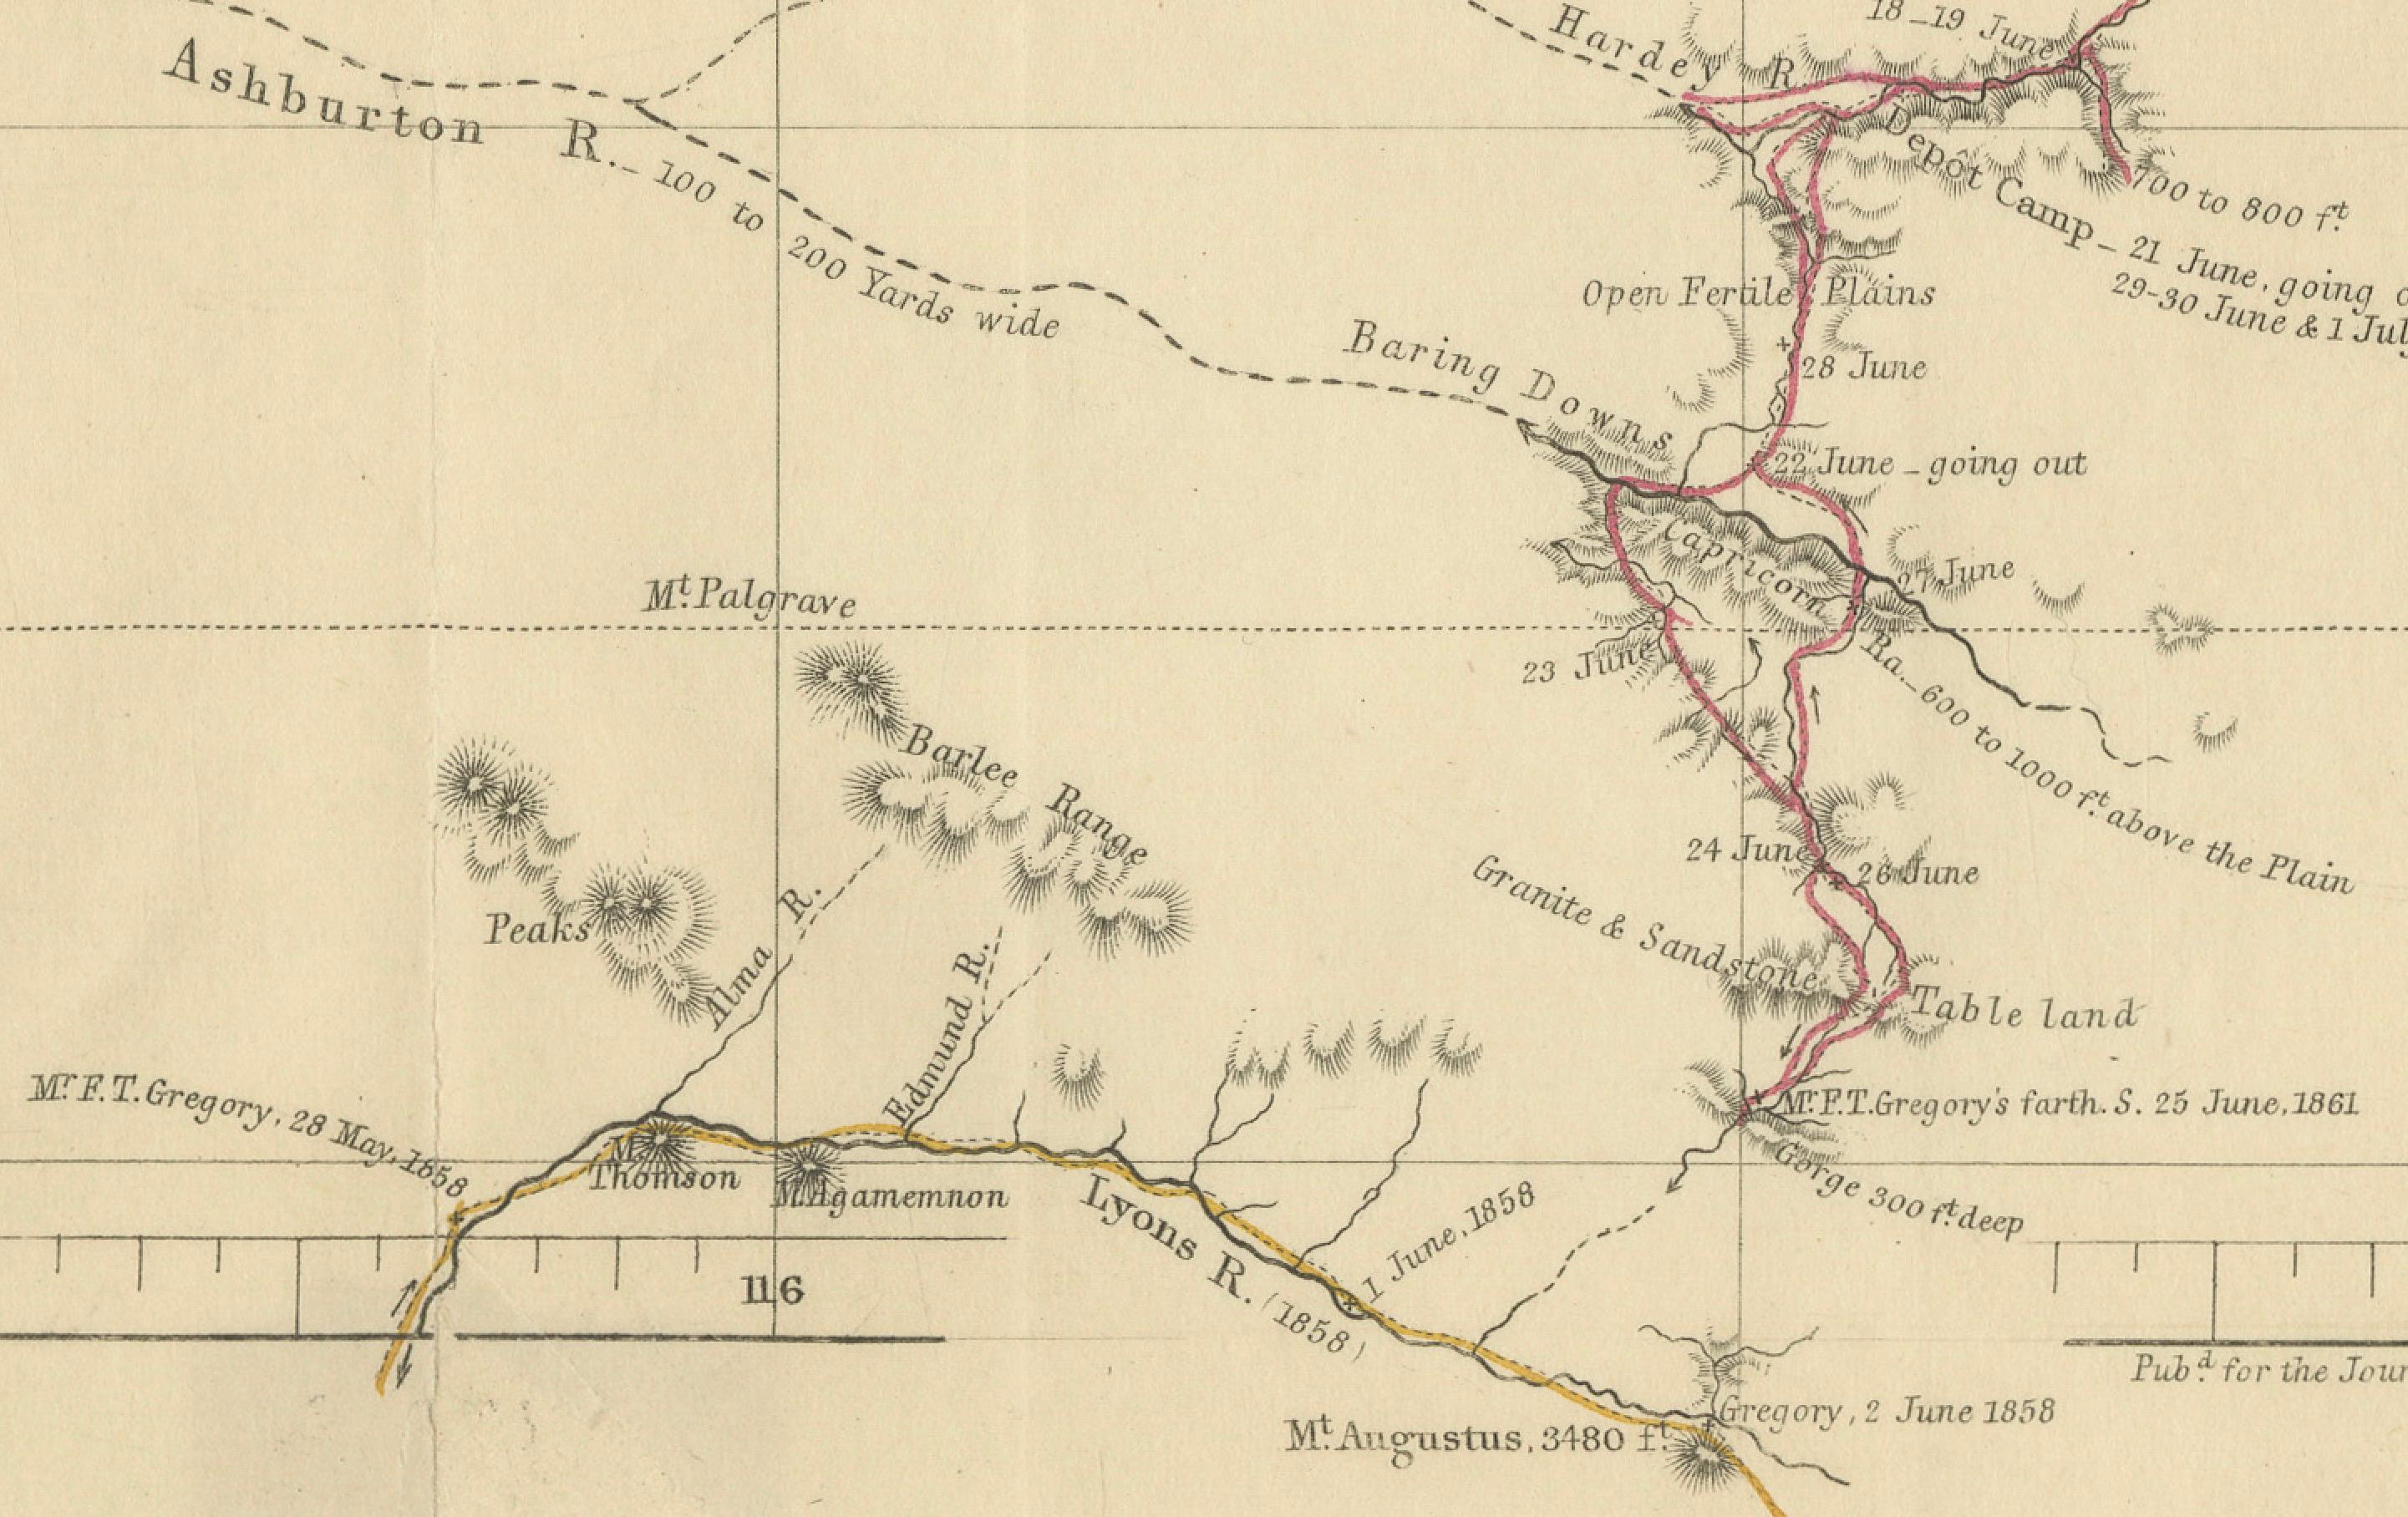 The map  represents the route taken during F.T. Gregory's 1861 North West Australian Expedition. 

This exploration was a significant journey that took place over the Pilbara region, starting from the Ashburton River and extending to the Dampier